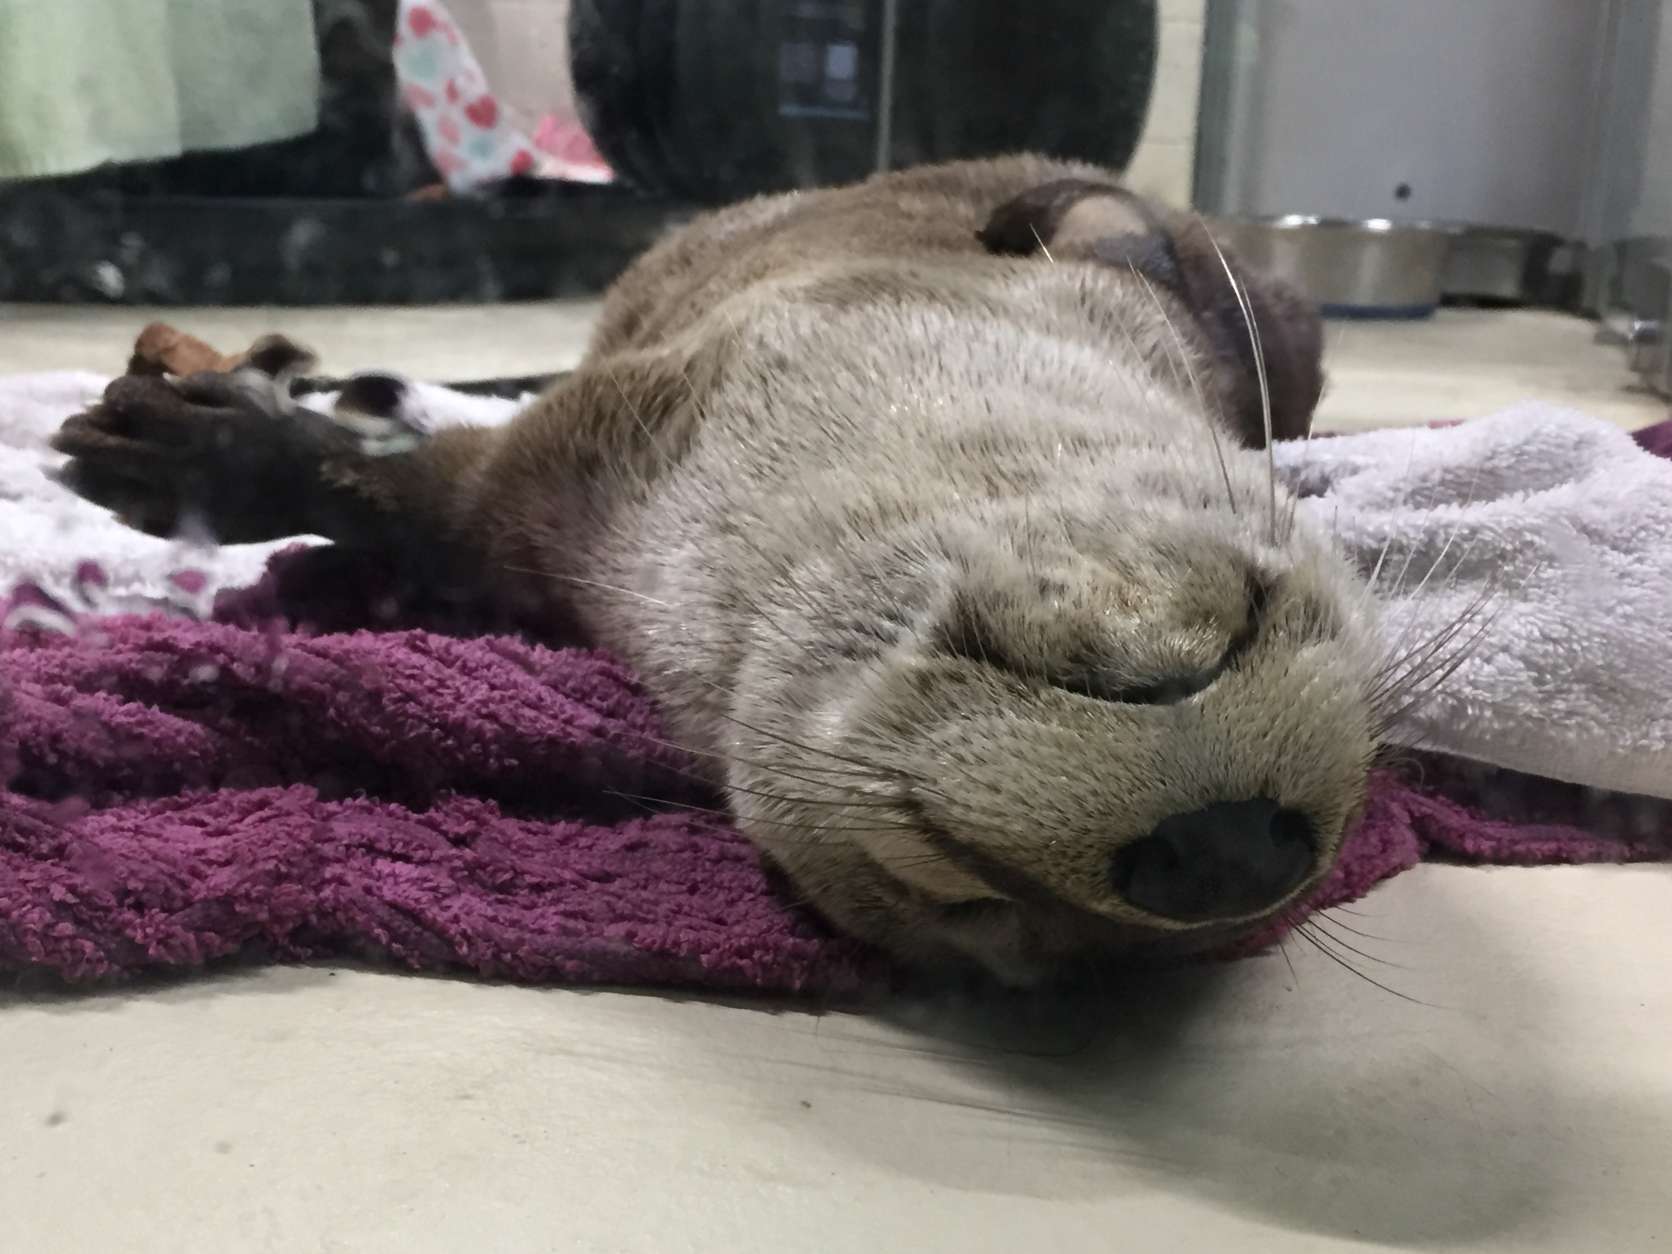 Webbed feet up! Could Calvert the river otter look any more relaxed? The museum says he's about a year old. (WTOP/Michelle Basch)